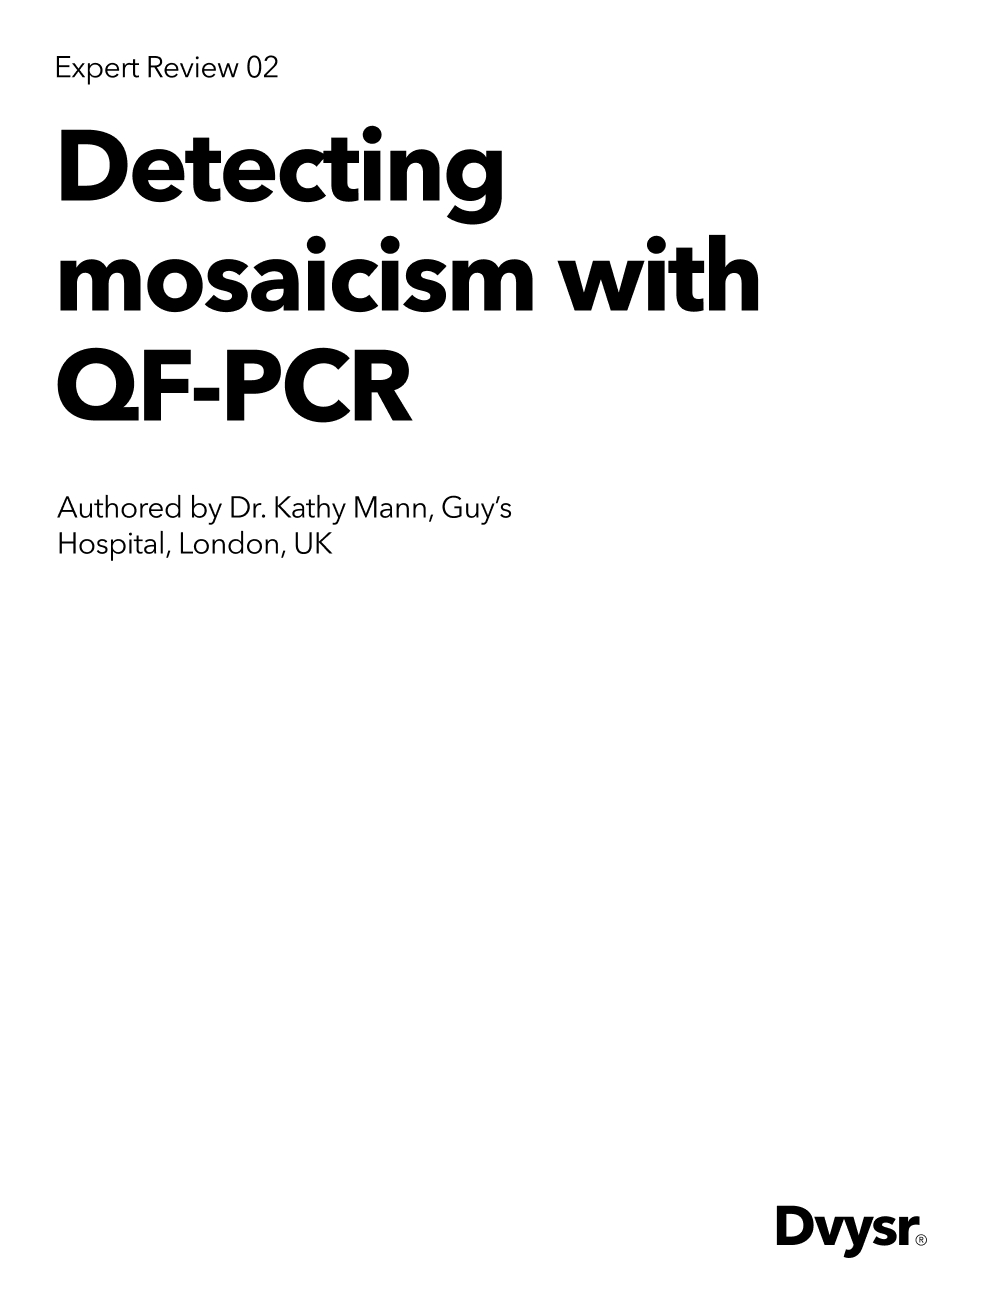 Detecting mosaicism with QF-PCR